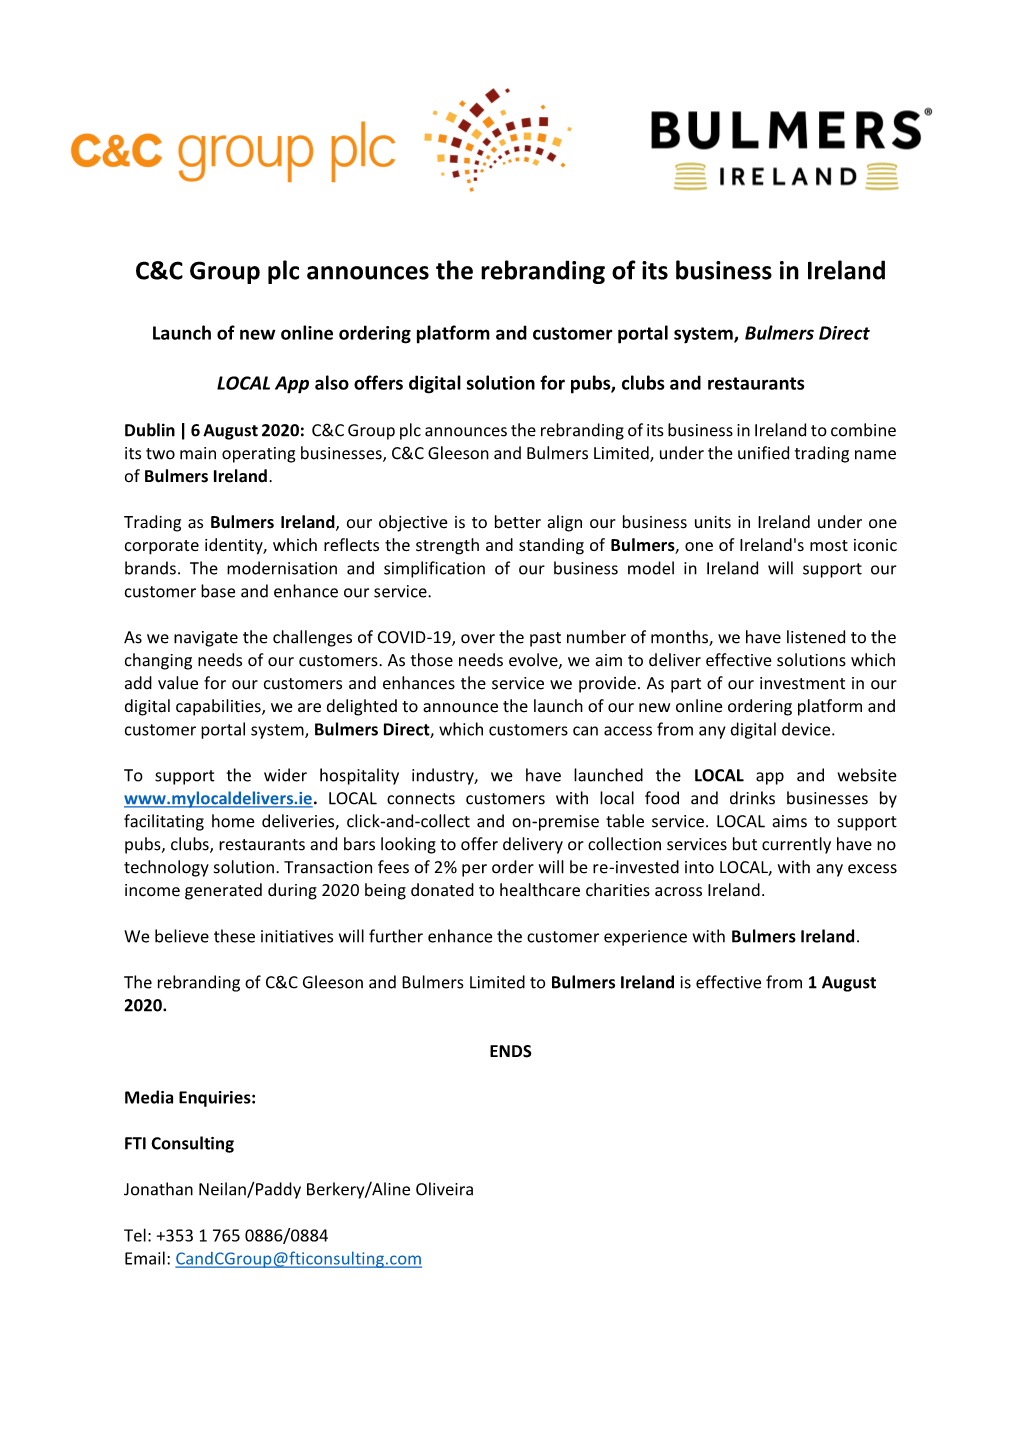 C&C Group Plc Announces the Rebranding of Its Business in Ireland